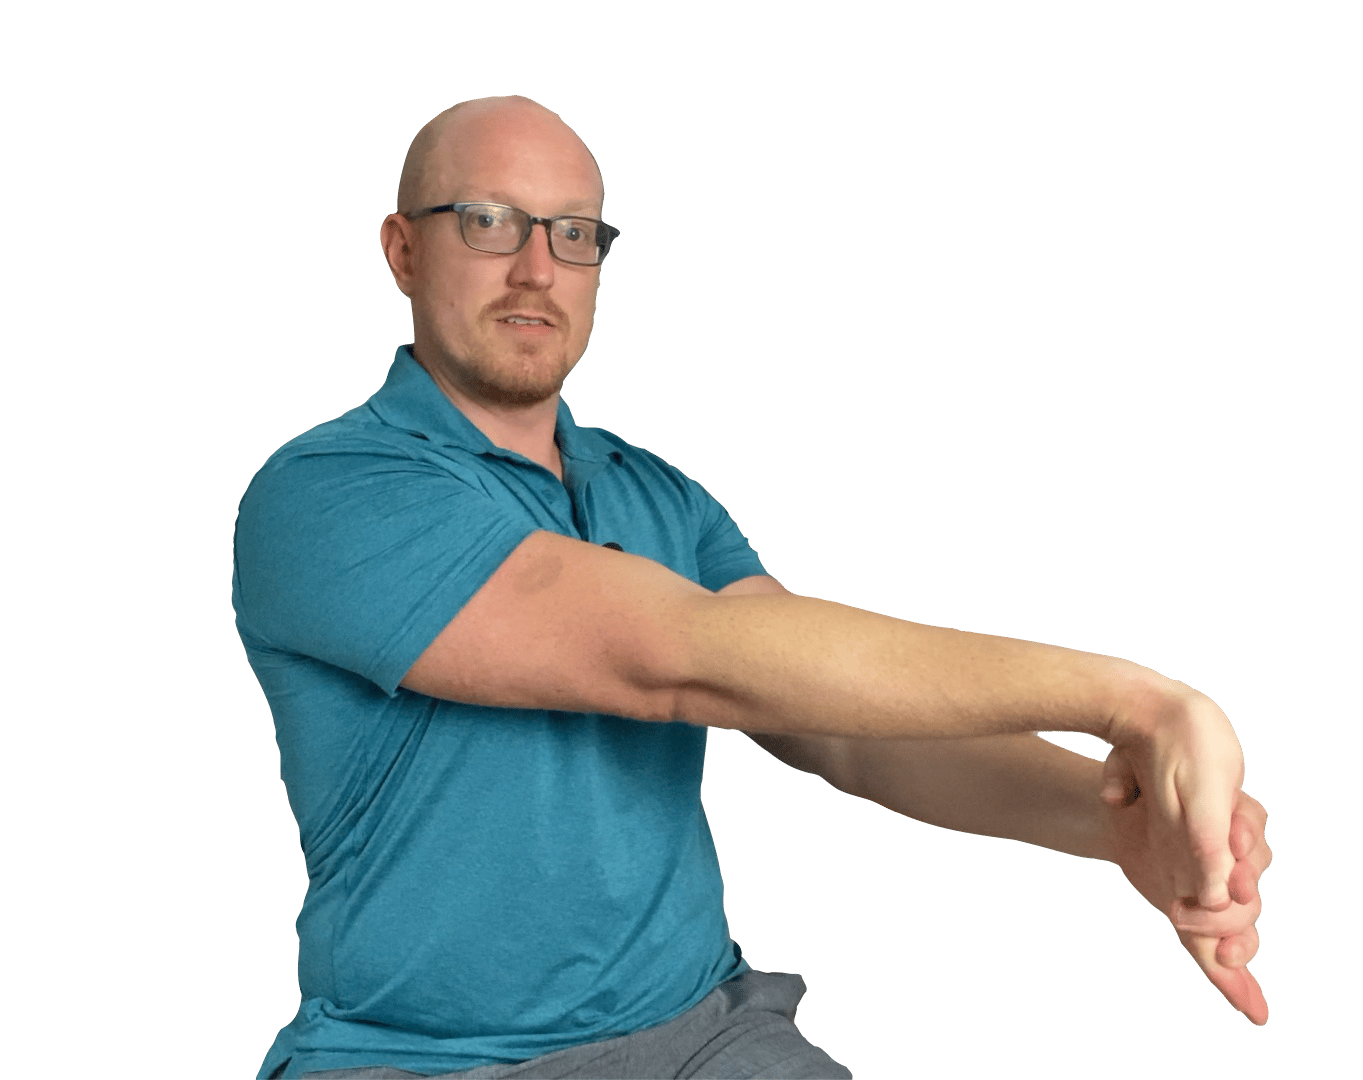 Wrist Extension Stretch for Carpal Tunnel Syndrome